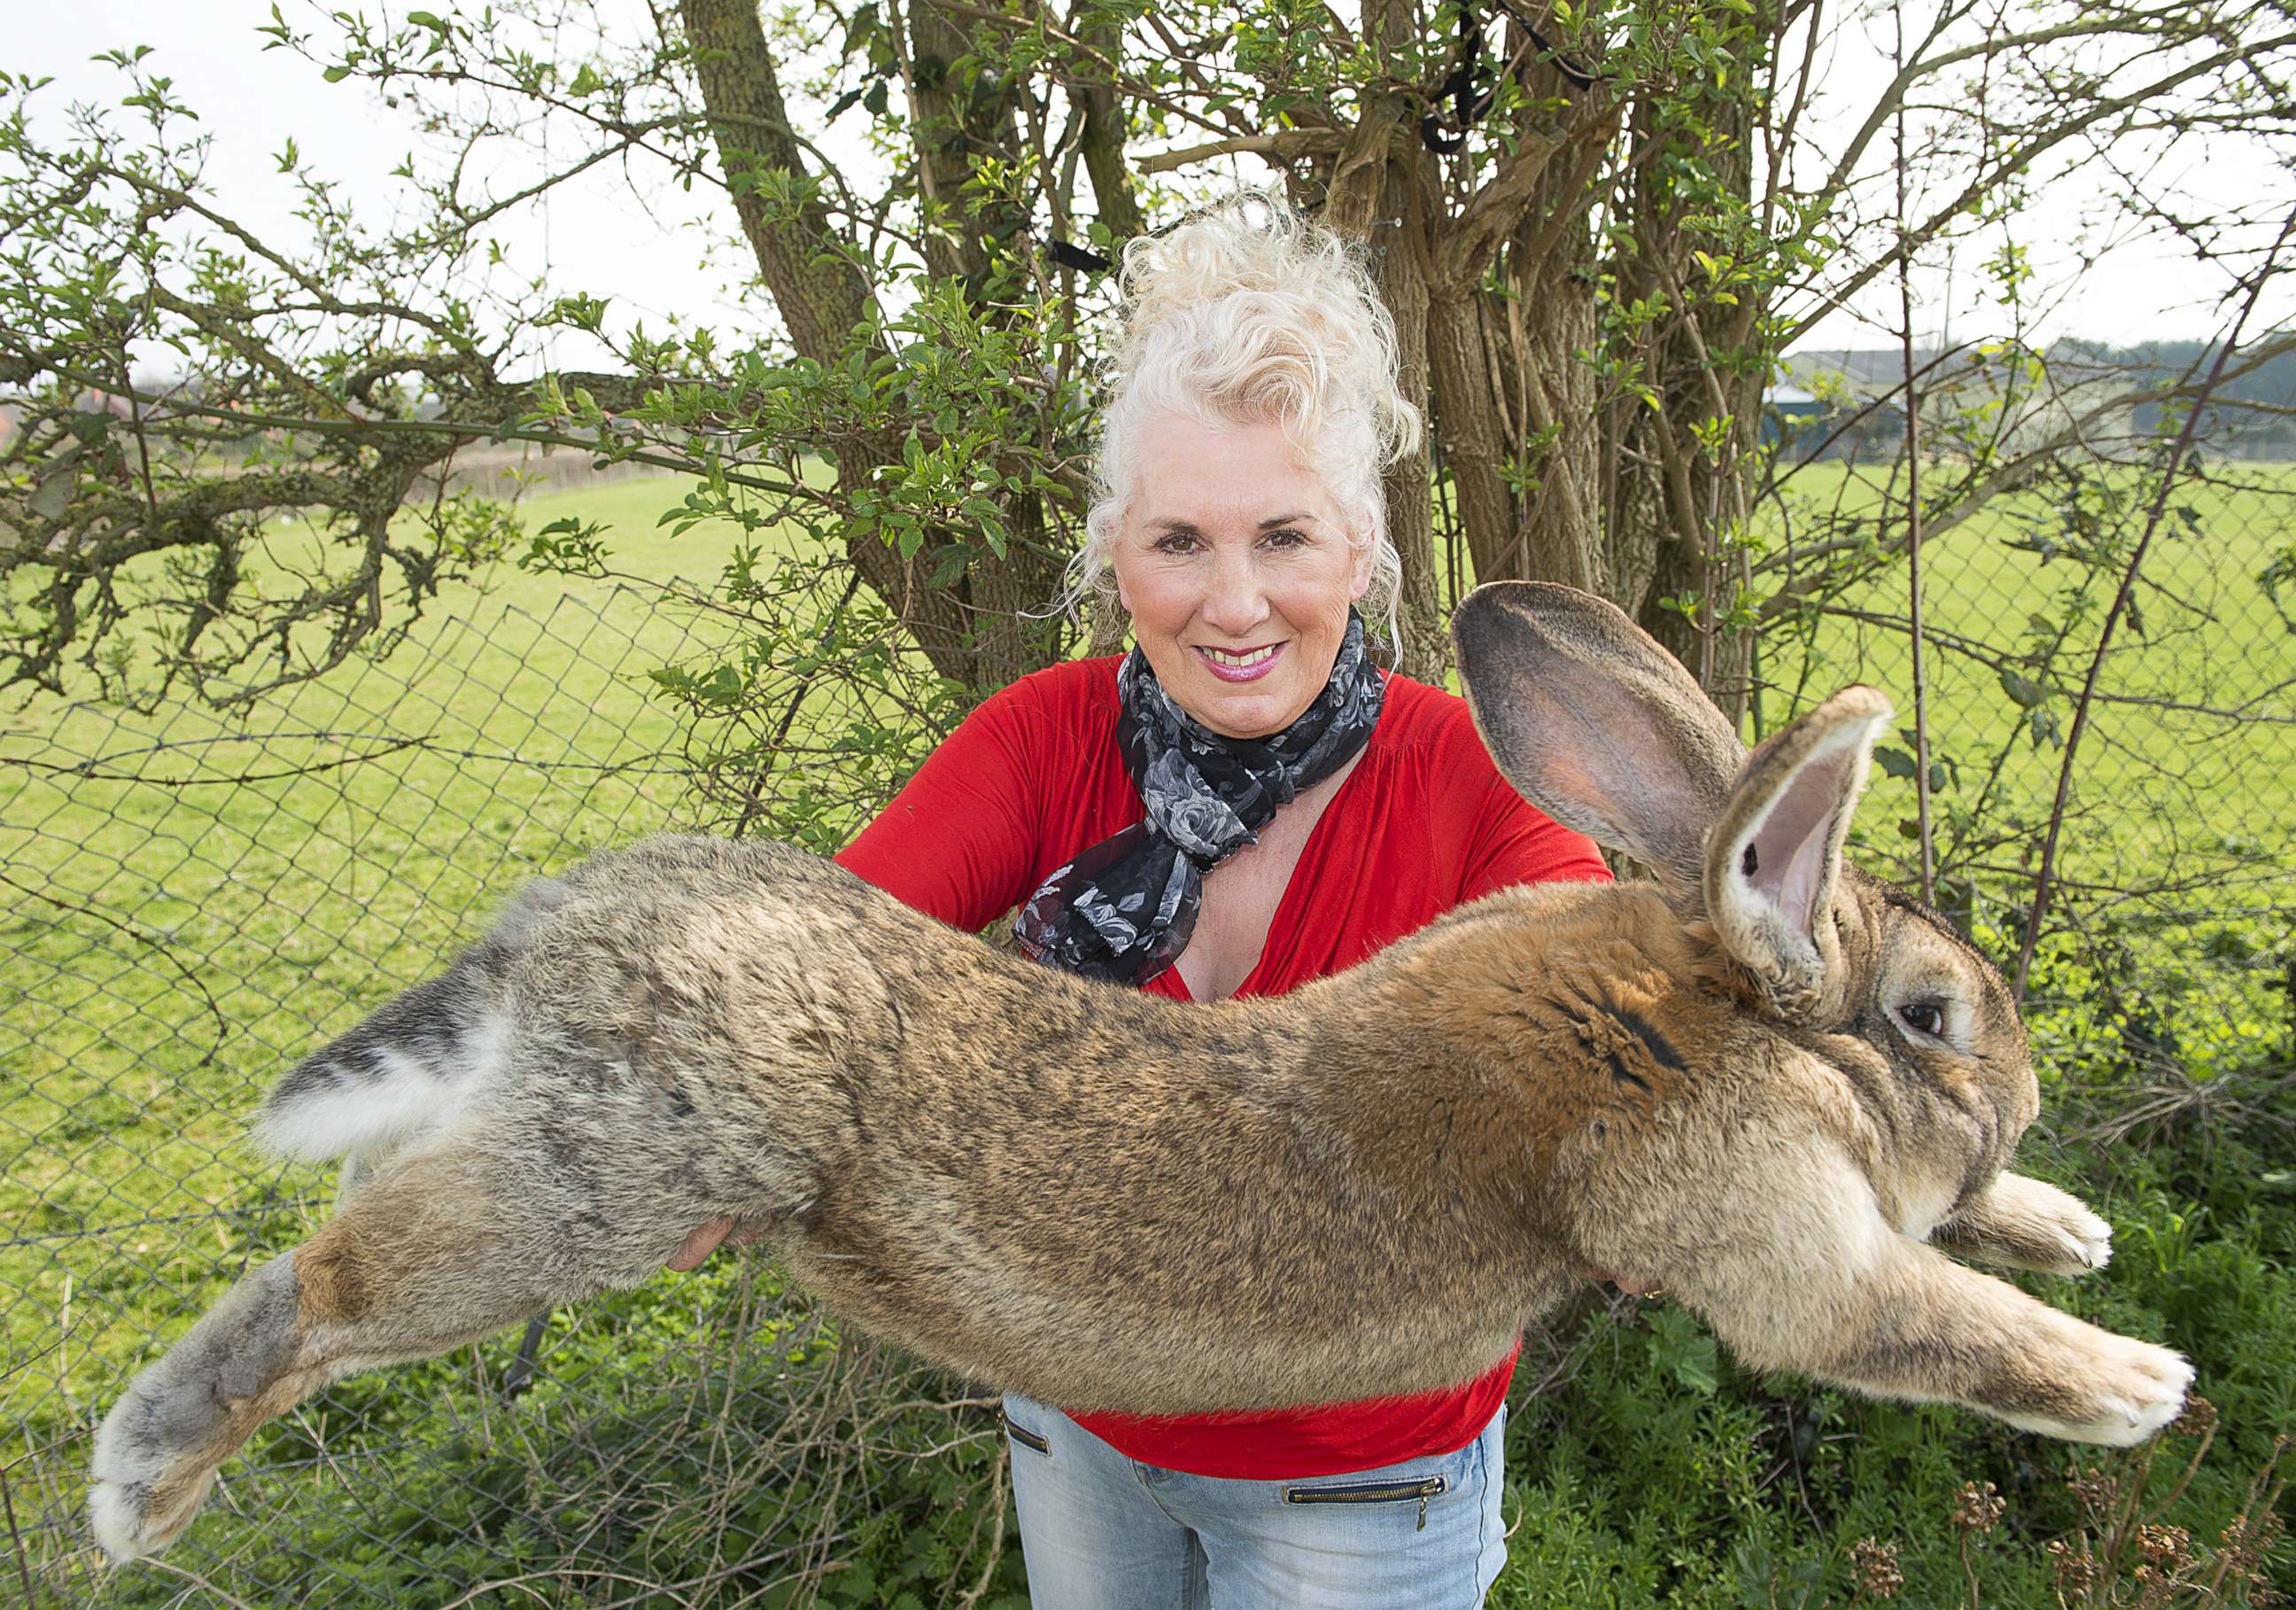 PHOTO: Annette Edwards from Worcestershire, England, holds Darius, her giant rabbit in 2015. He was reported missing the weekend of April 10-12, 2021.